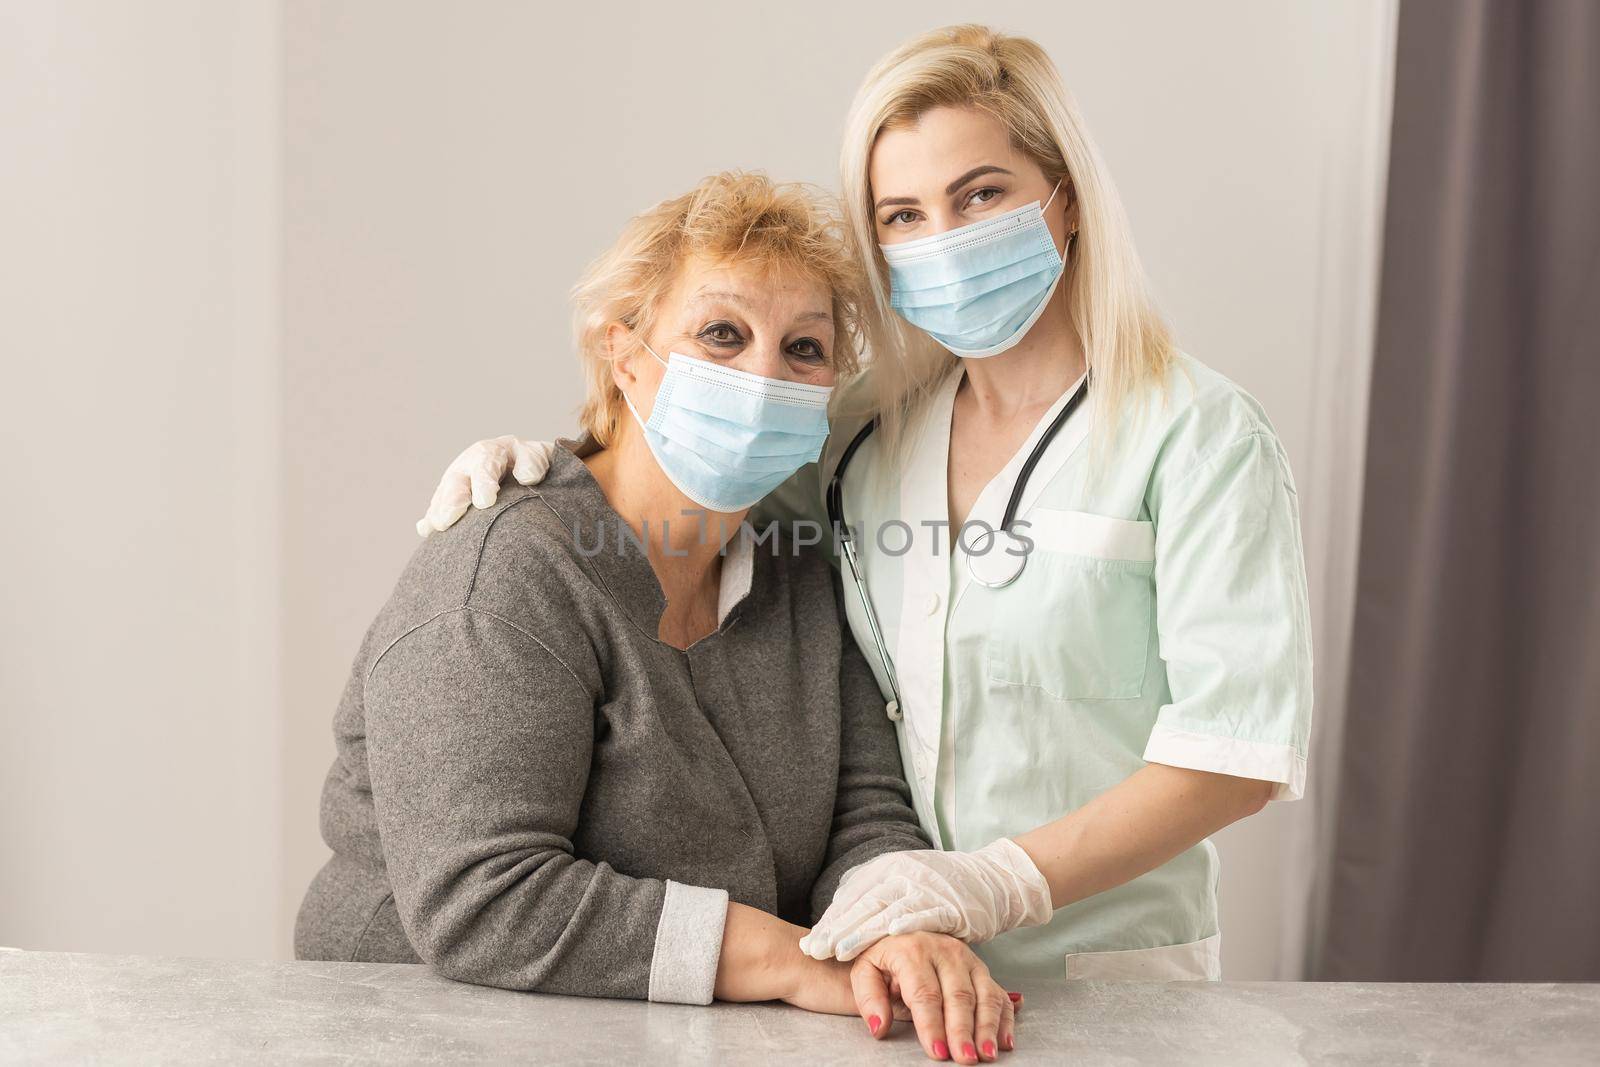 Senior woman with her home caregiver.